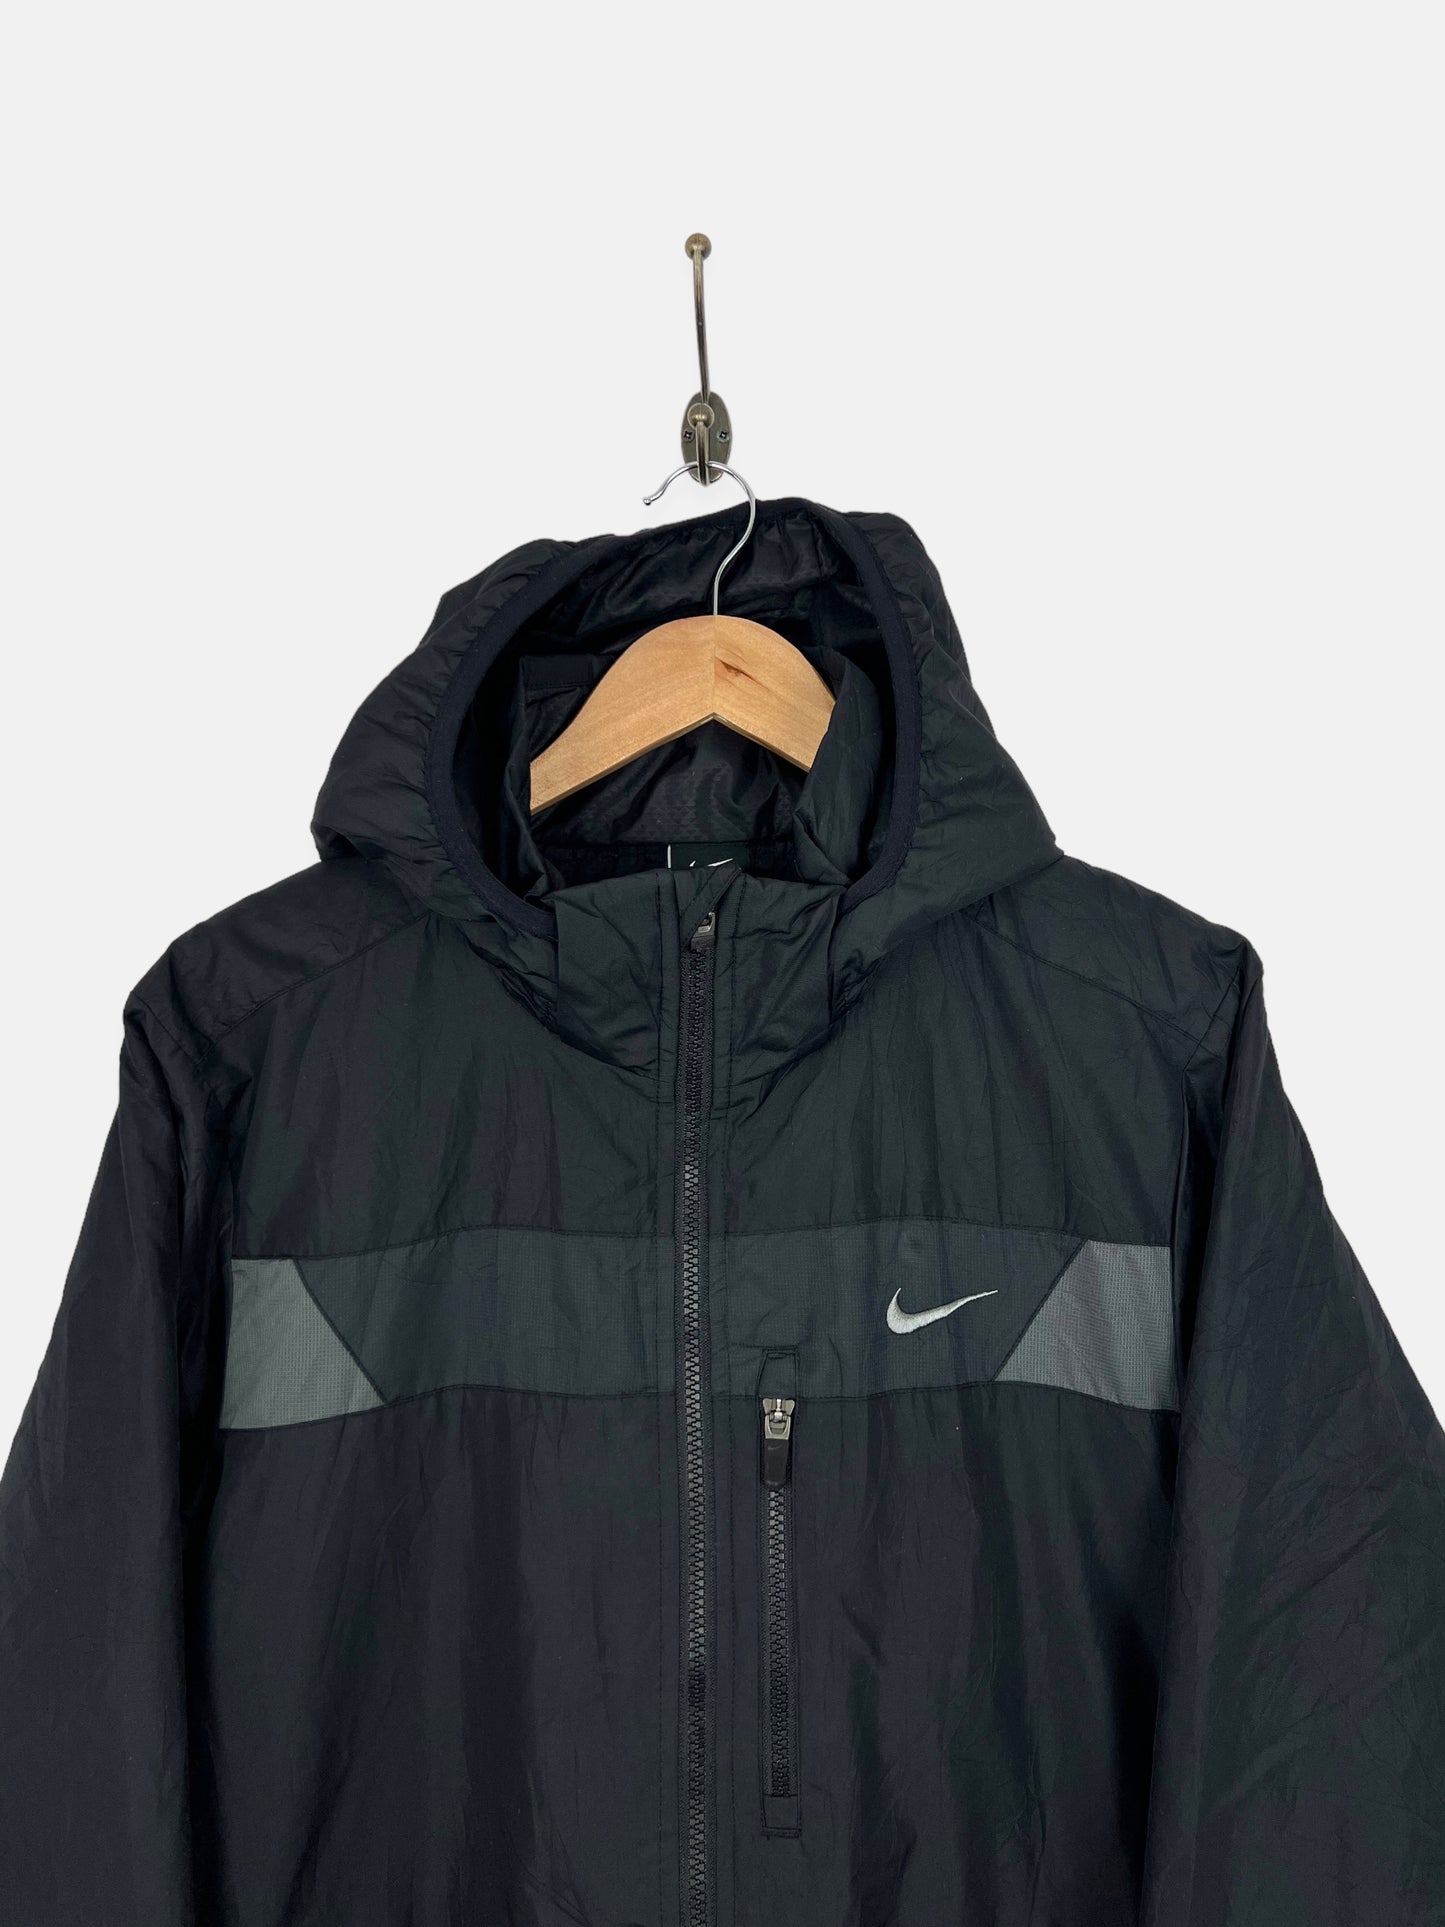 Nike Embroidered Jacket with Hood Size M